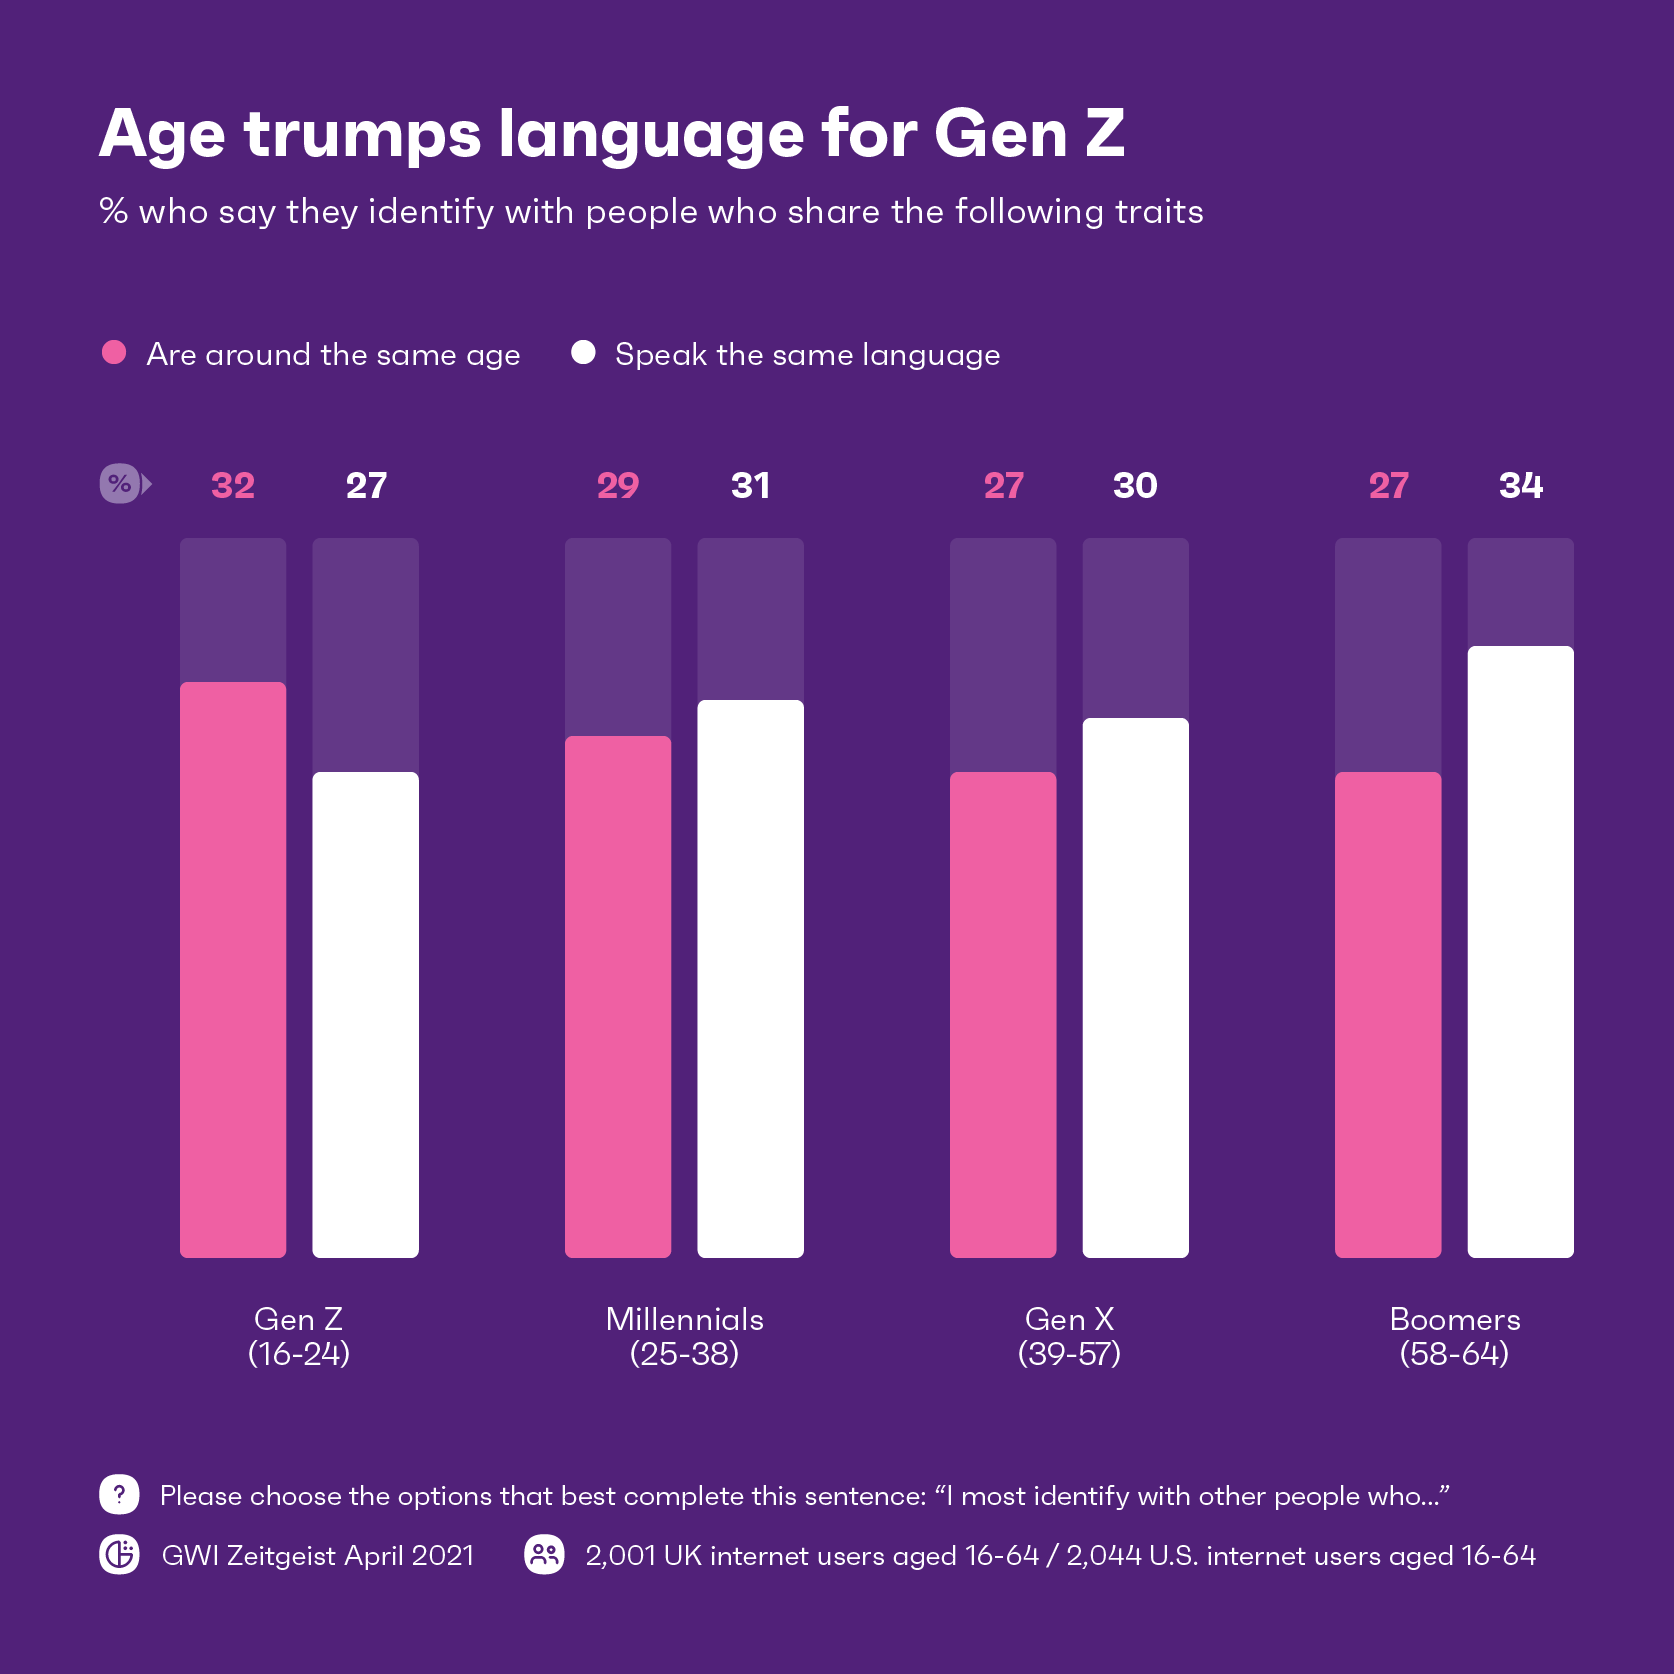 chart showing Gen Z identify more with those their age than those they share a language with